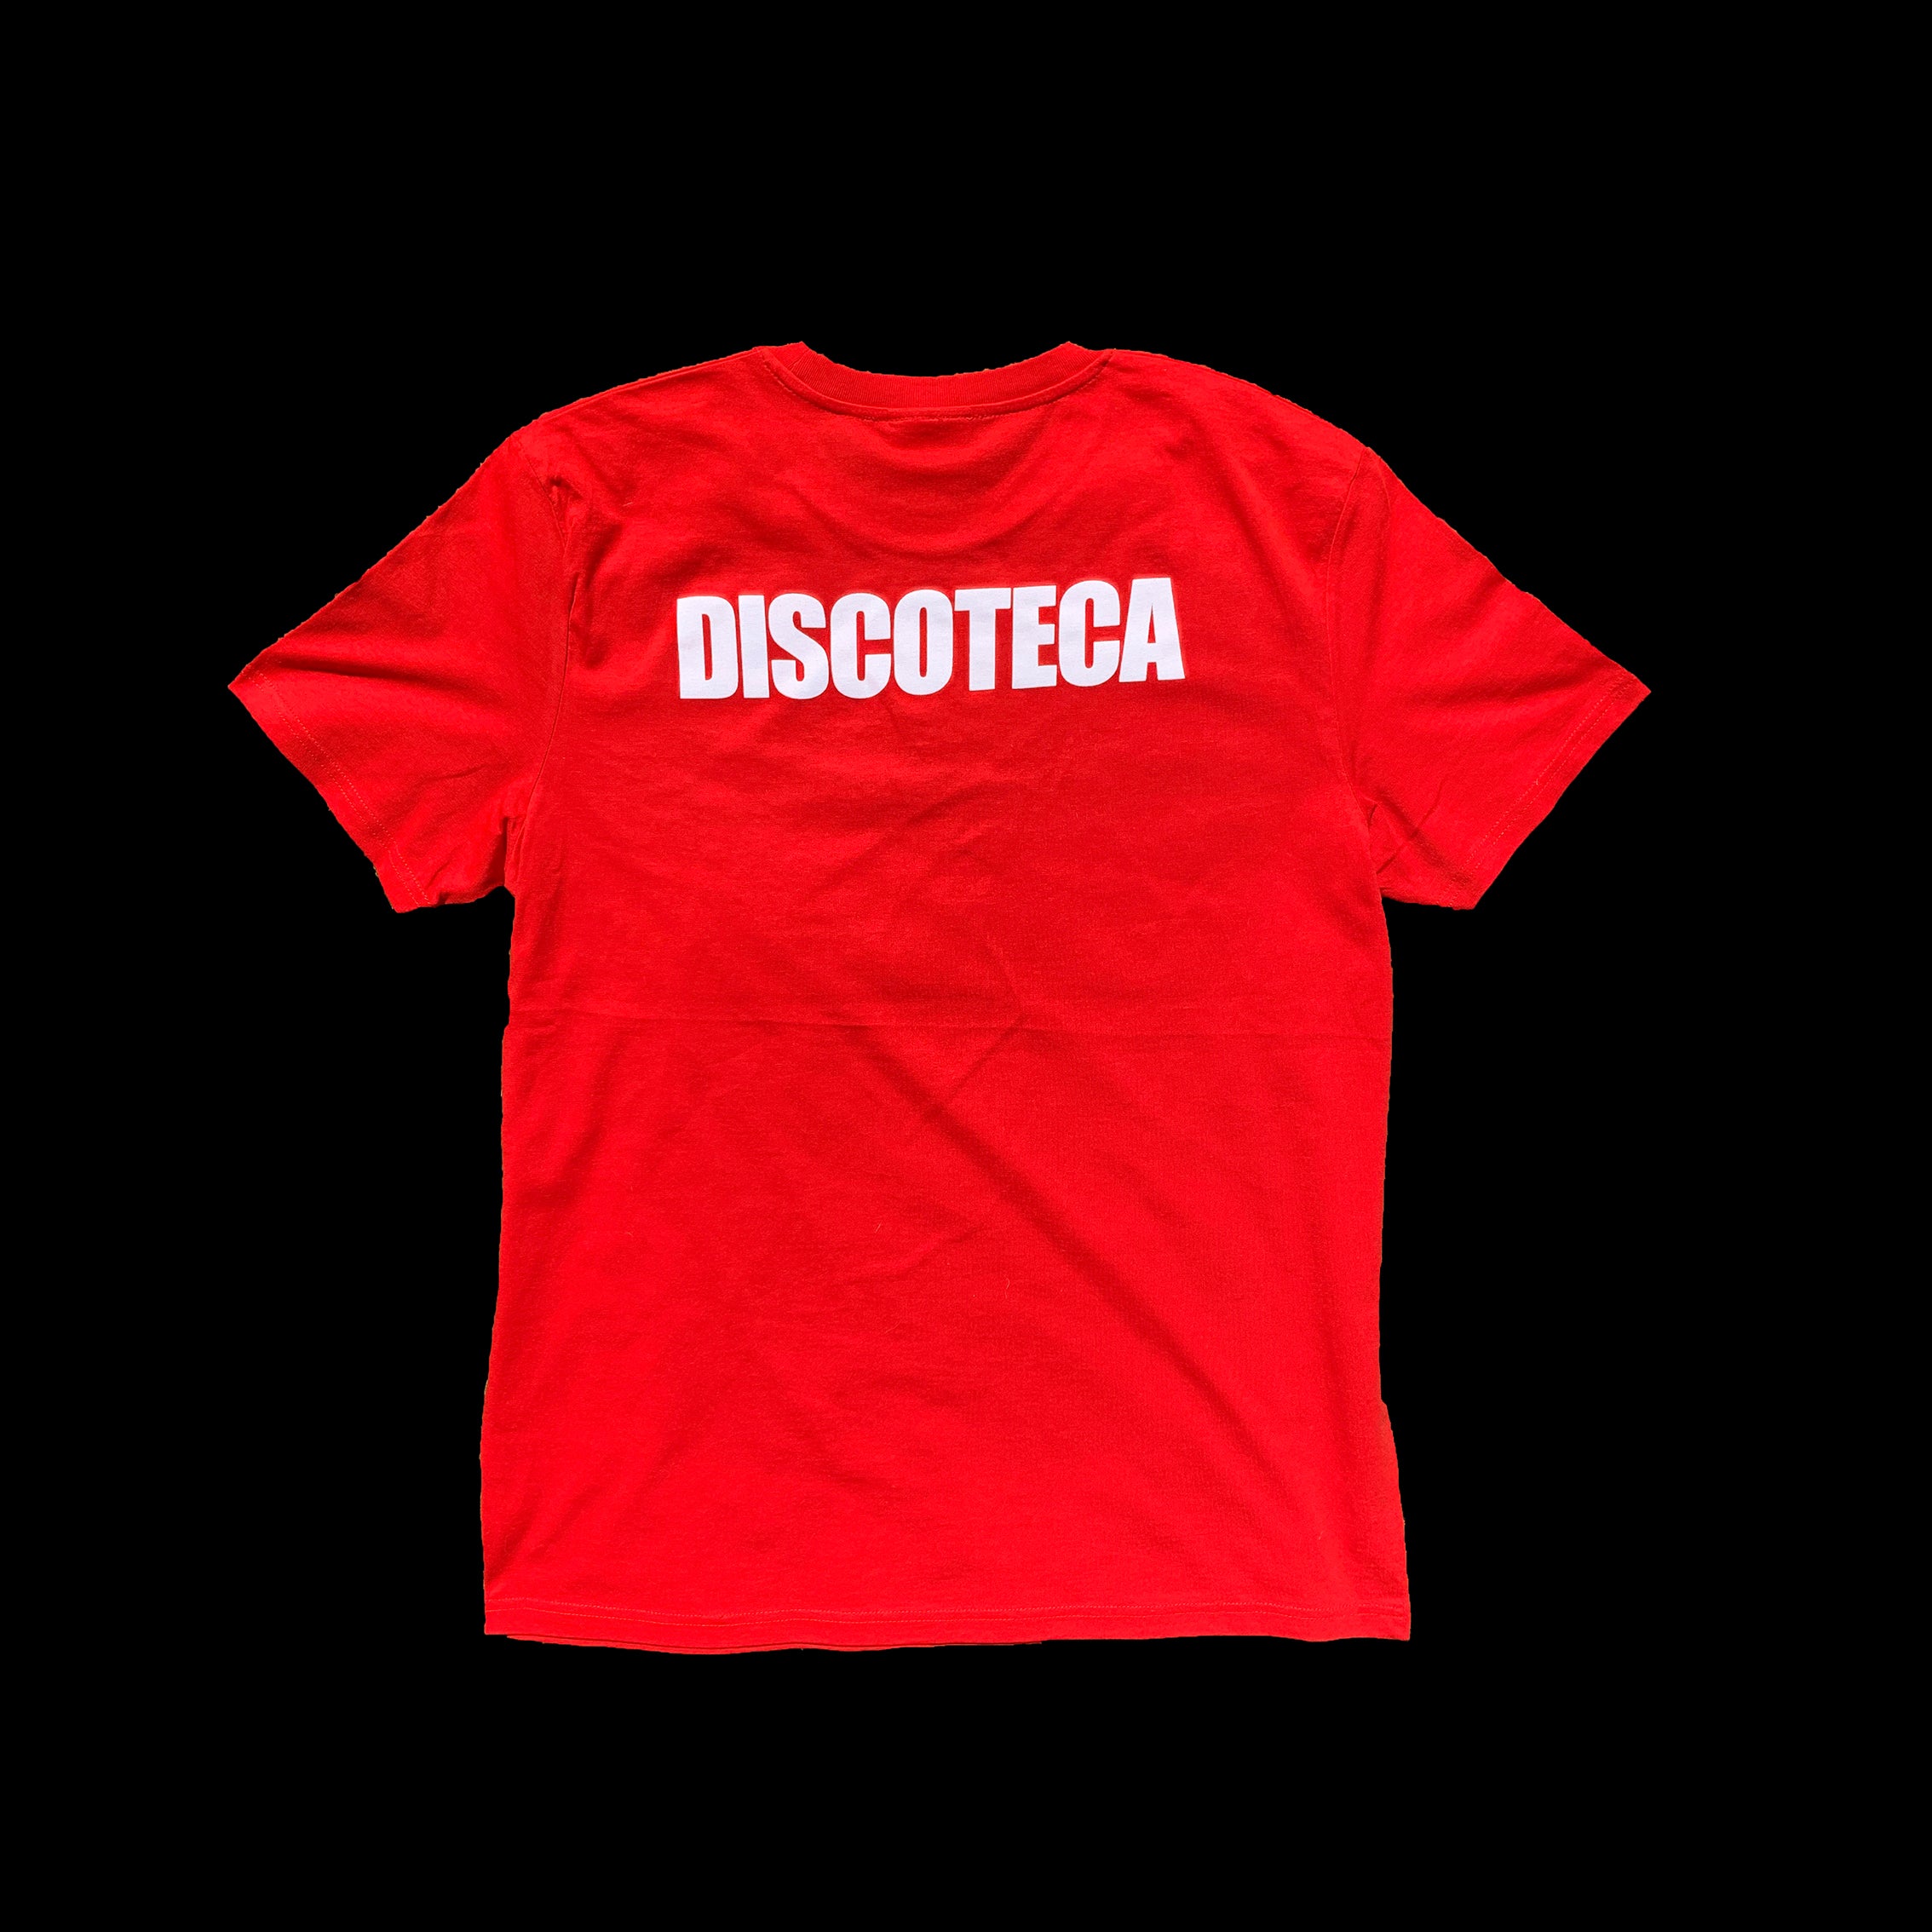 Discoteca T-Shirt – red – Limited to 150